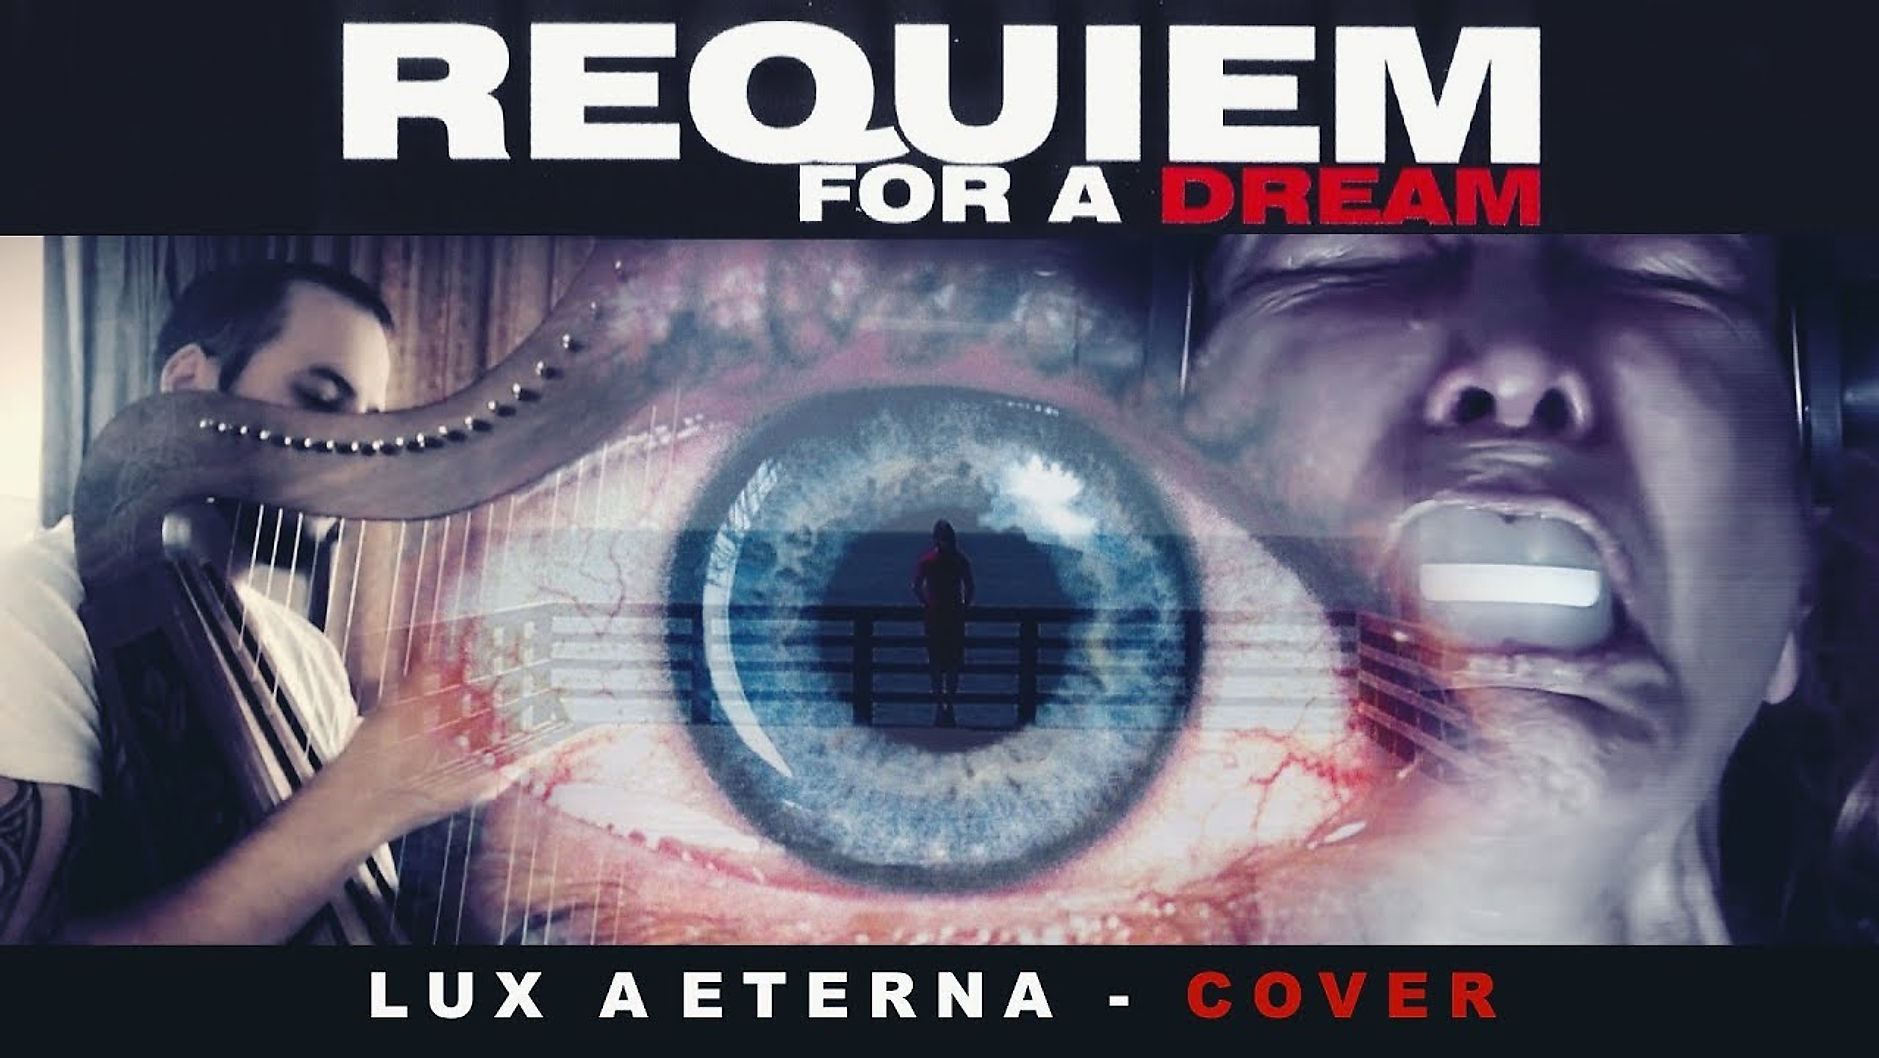 REQUIEM FOR A DREAM - LUX AETERNA Cover (harp, violins and more)